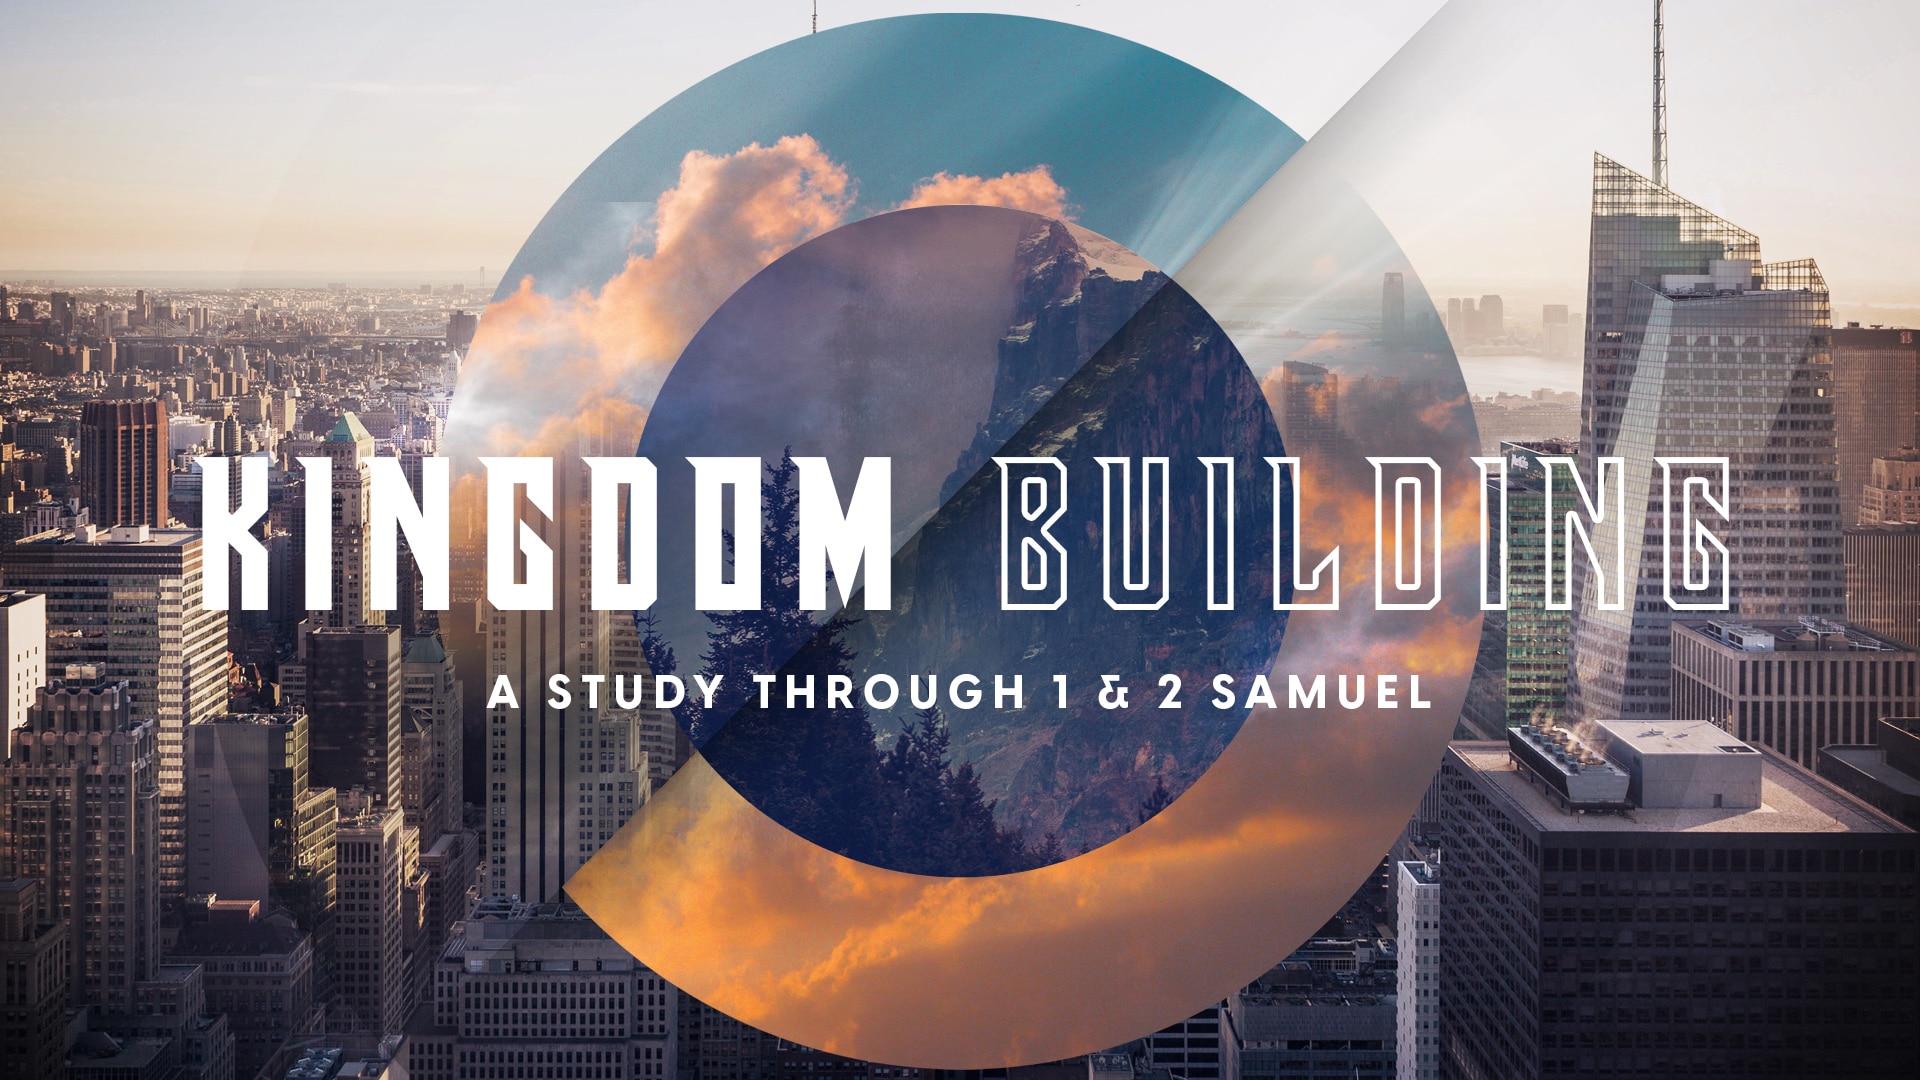 2 Samuel 9: Reflecting With Compassion (Kingdom Building) Image